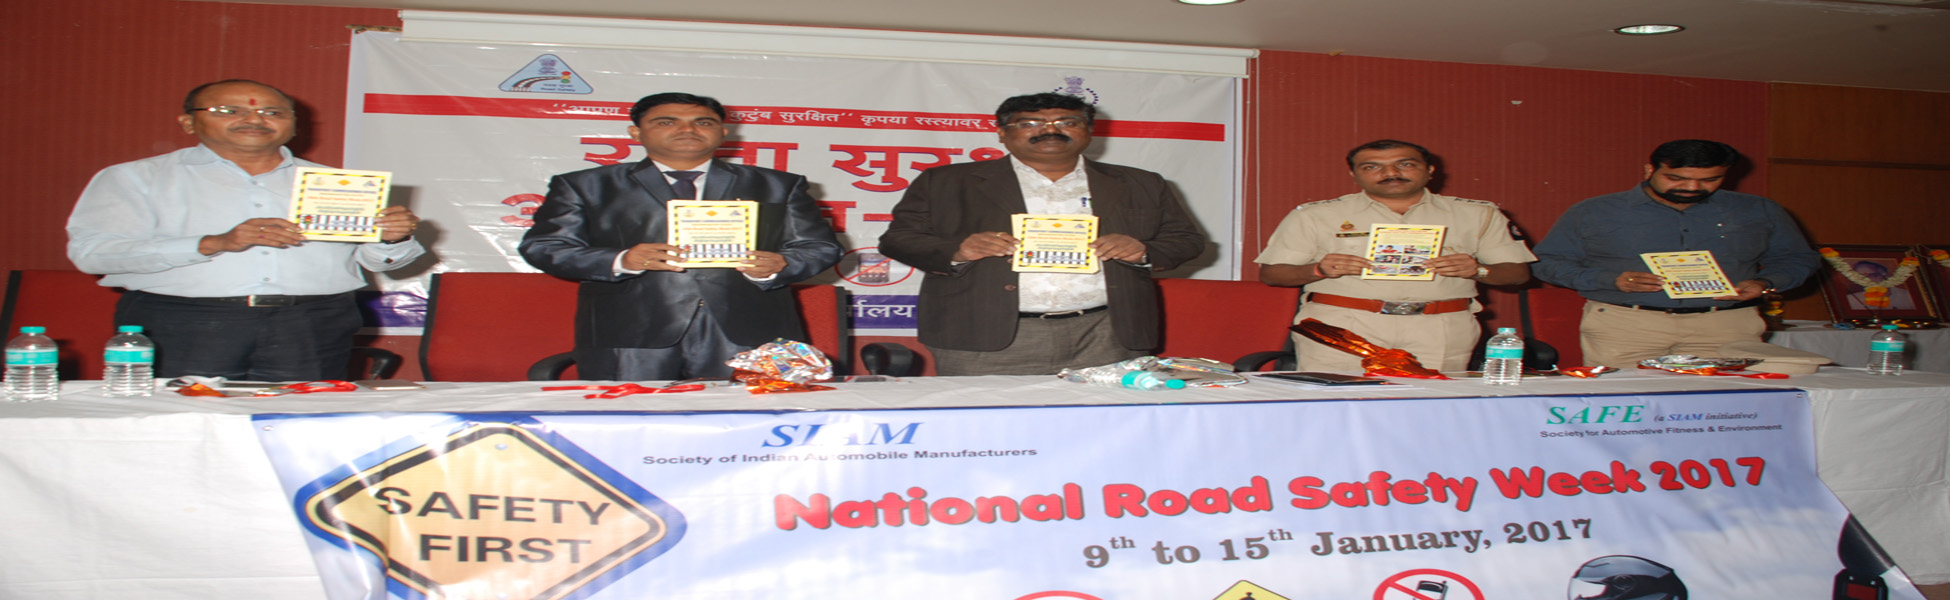 National Road Safety Week 2017